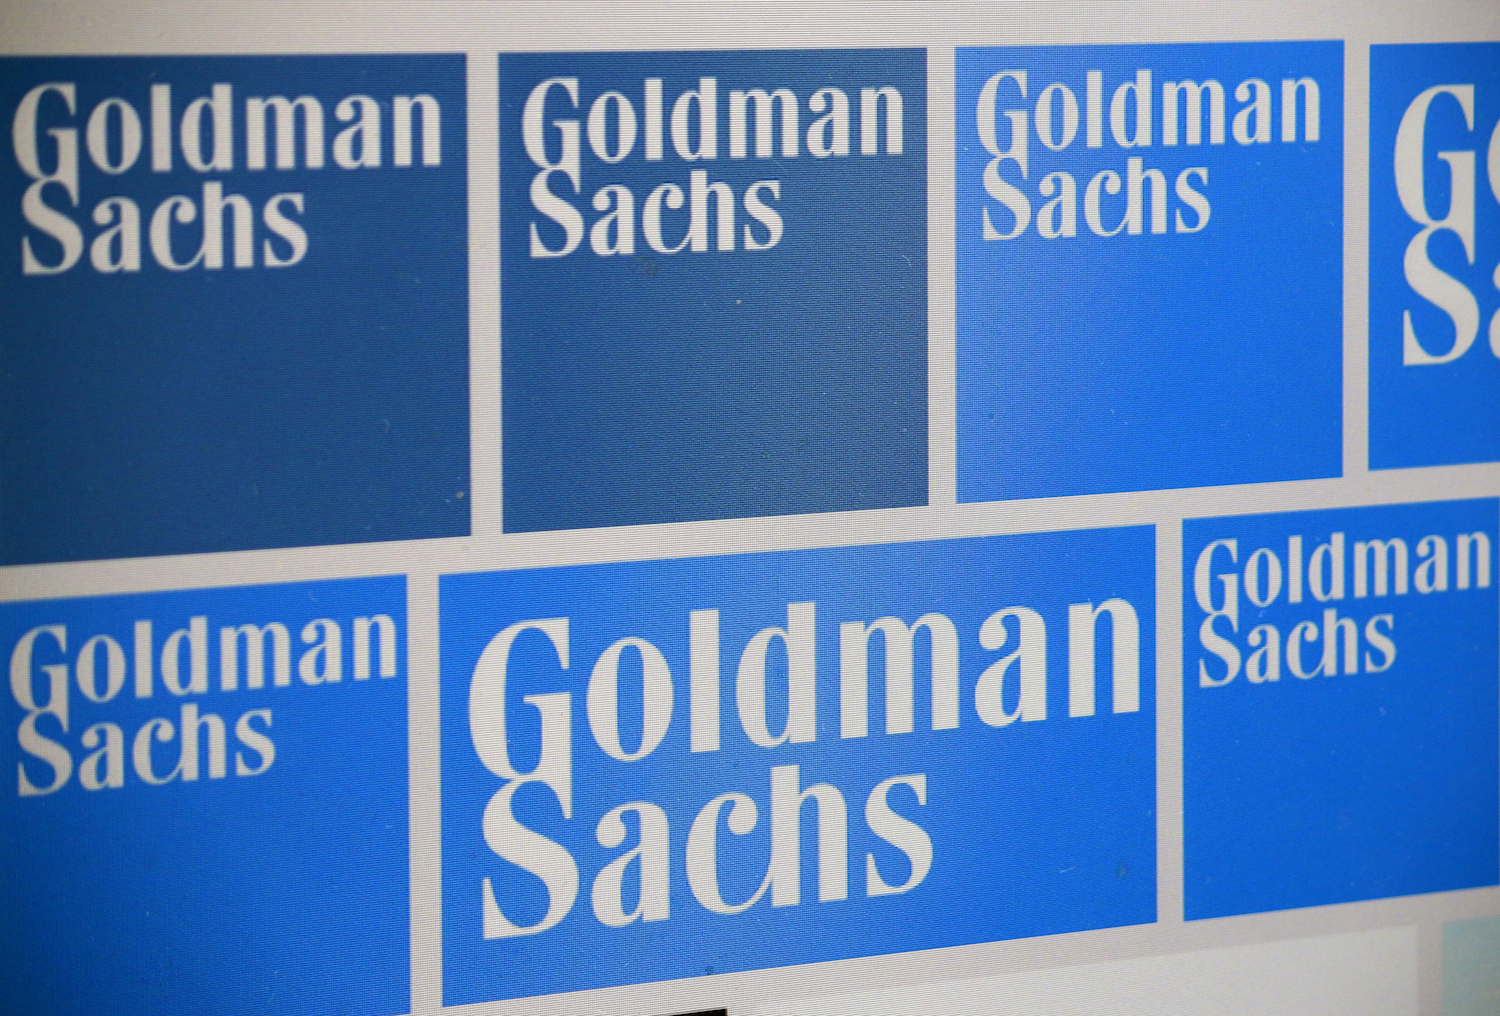 Goldman Sachs Analysts’ Slide Suggests Now’s A Good Time To Buy Bitcoin